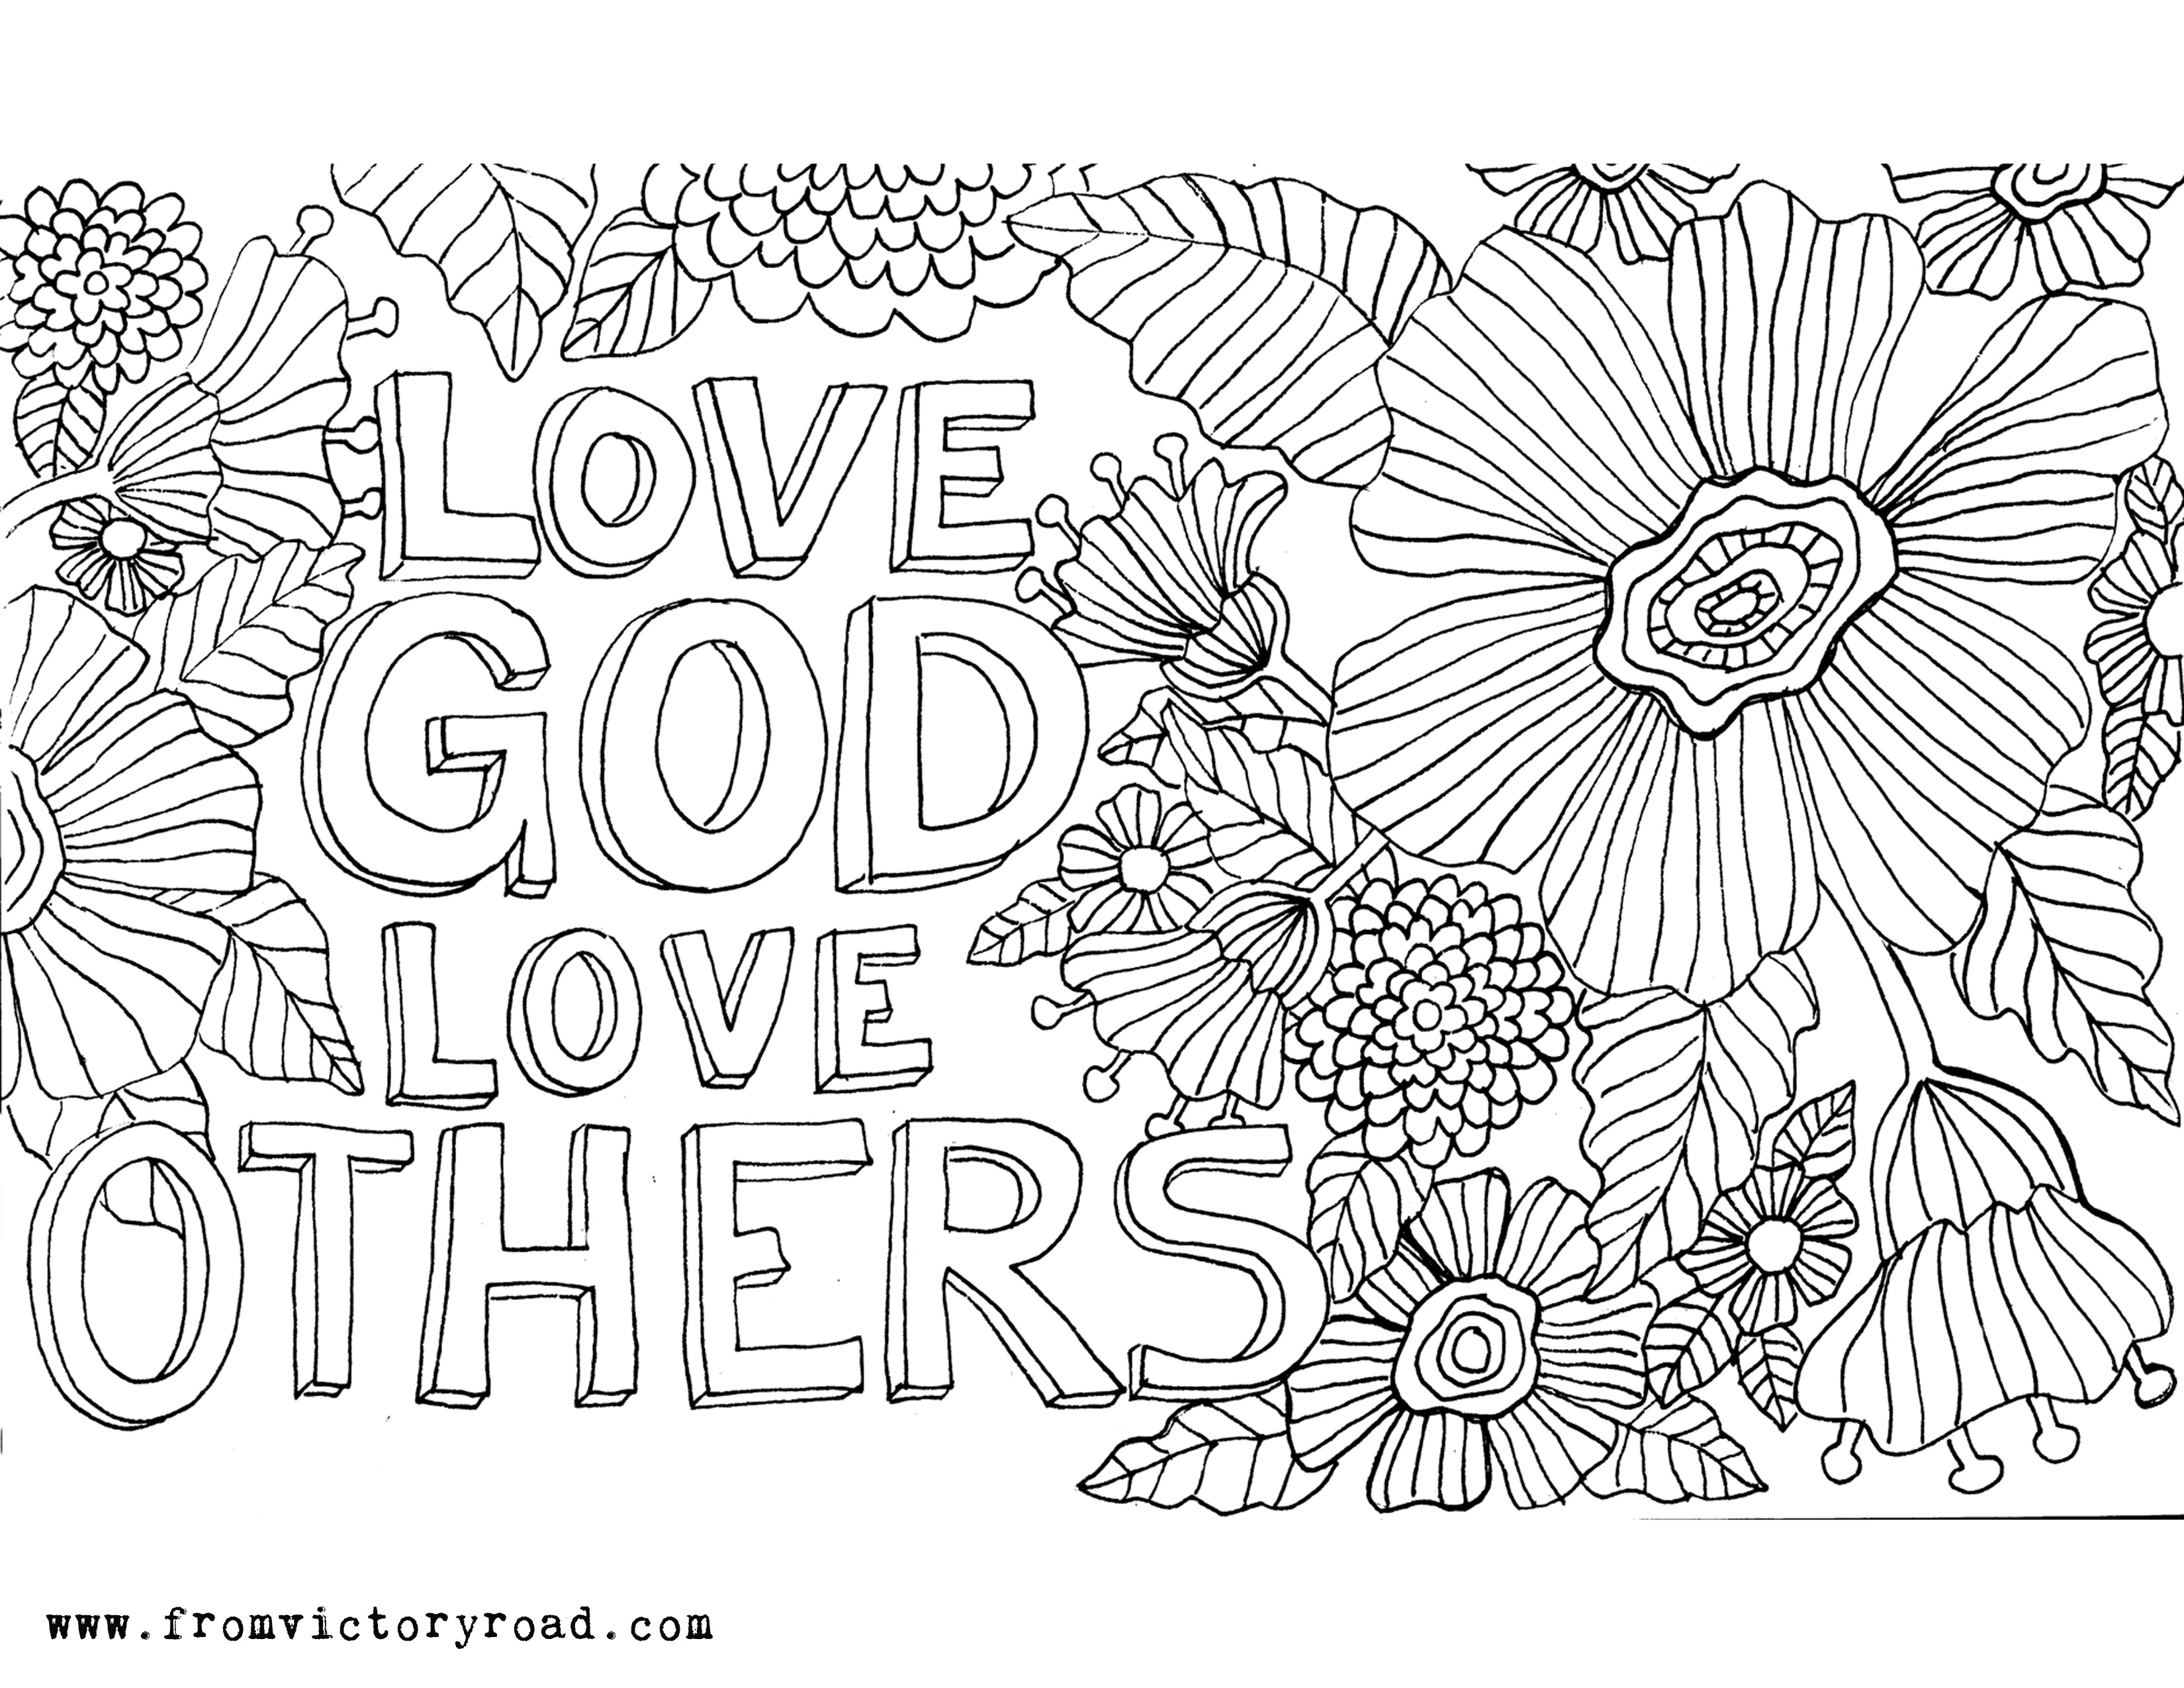 Love God Love Others - From Victory Road